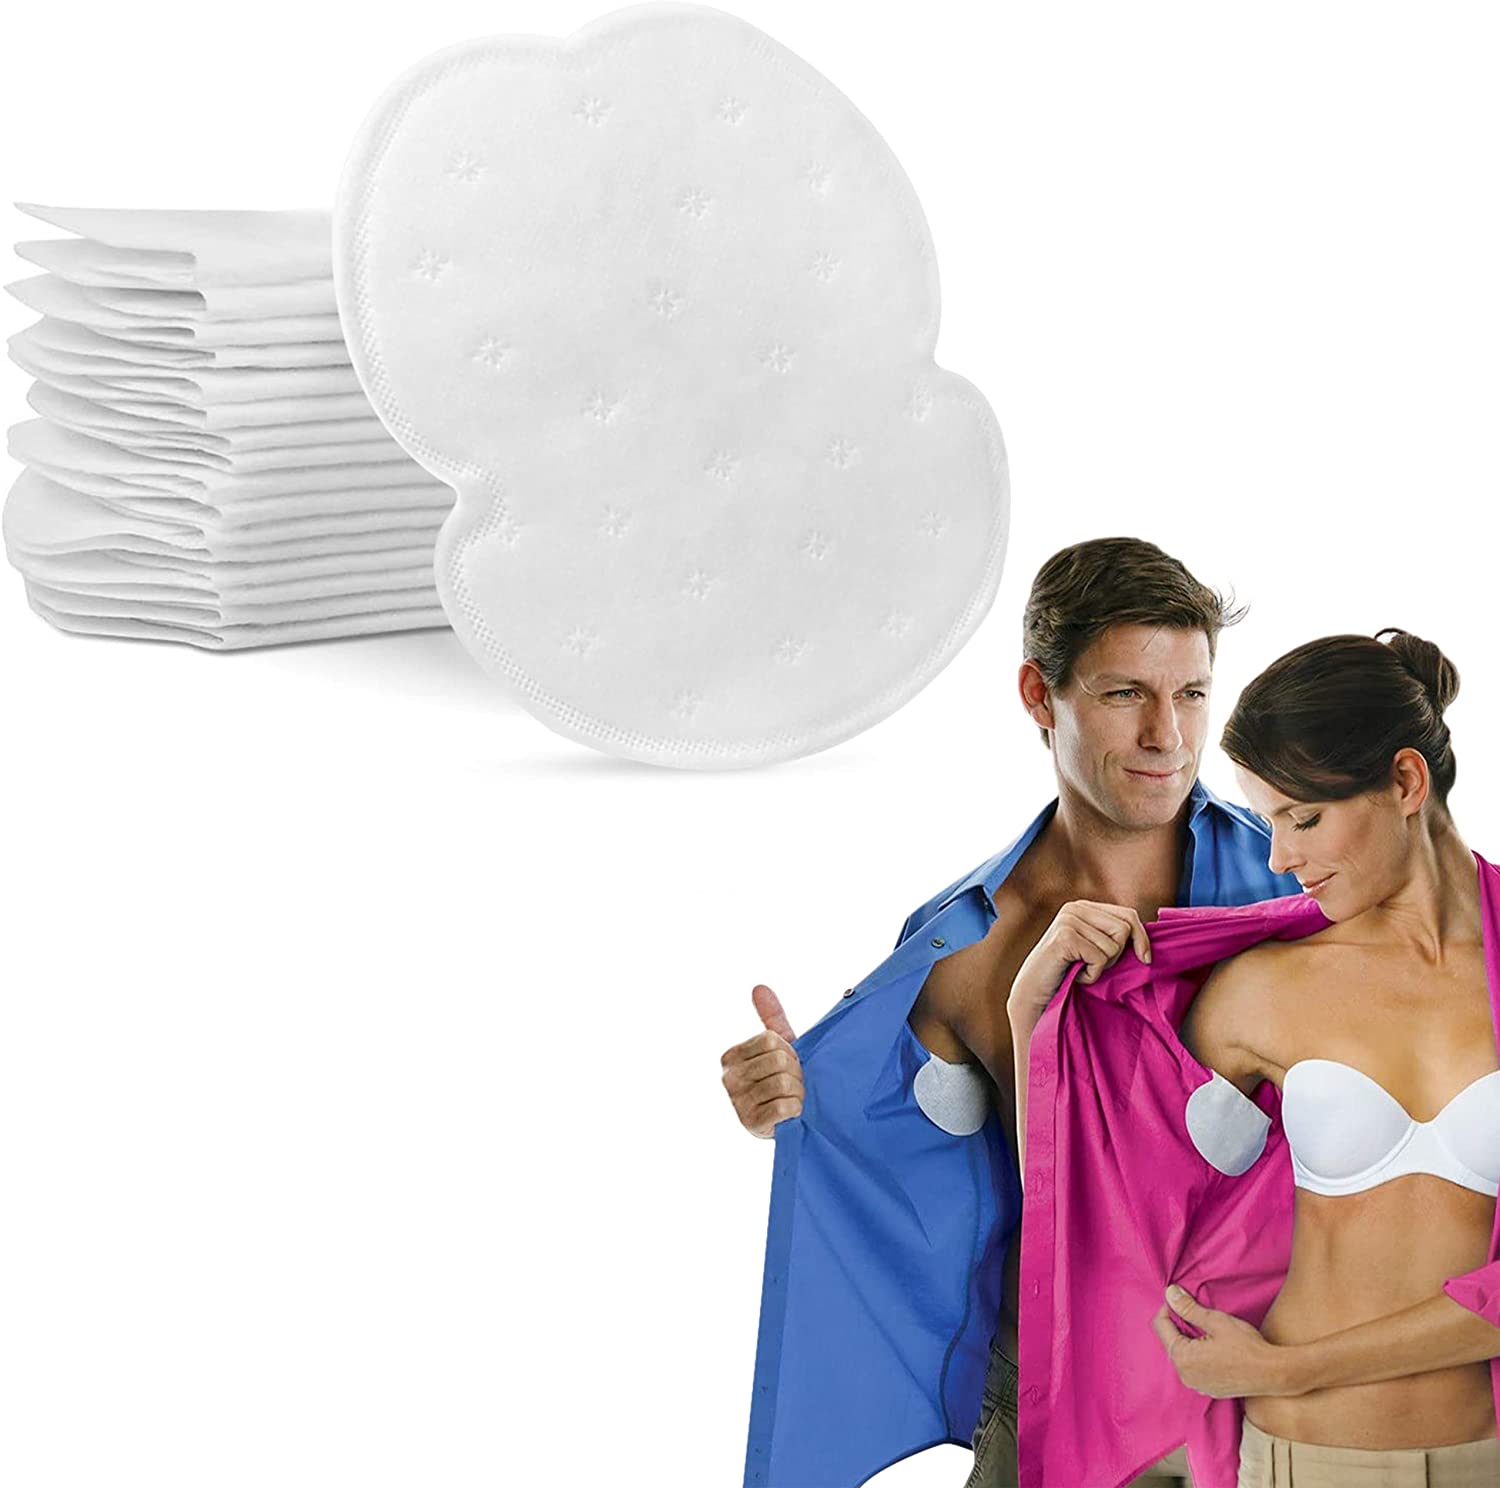 Underarm Sweat Pads Exist To Prevent Sweat Stains